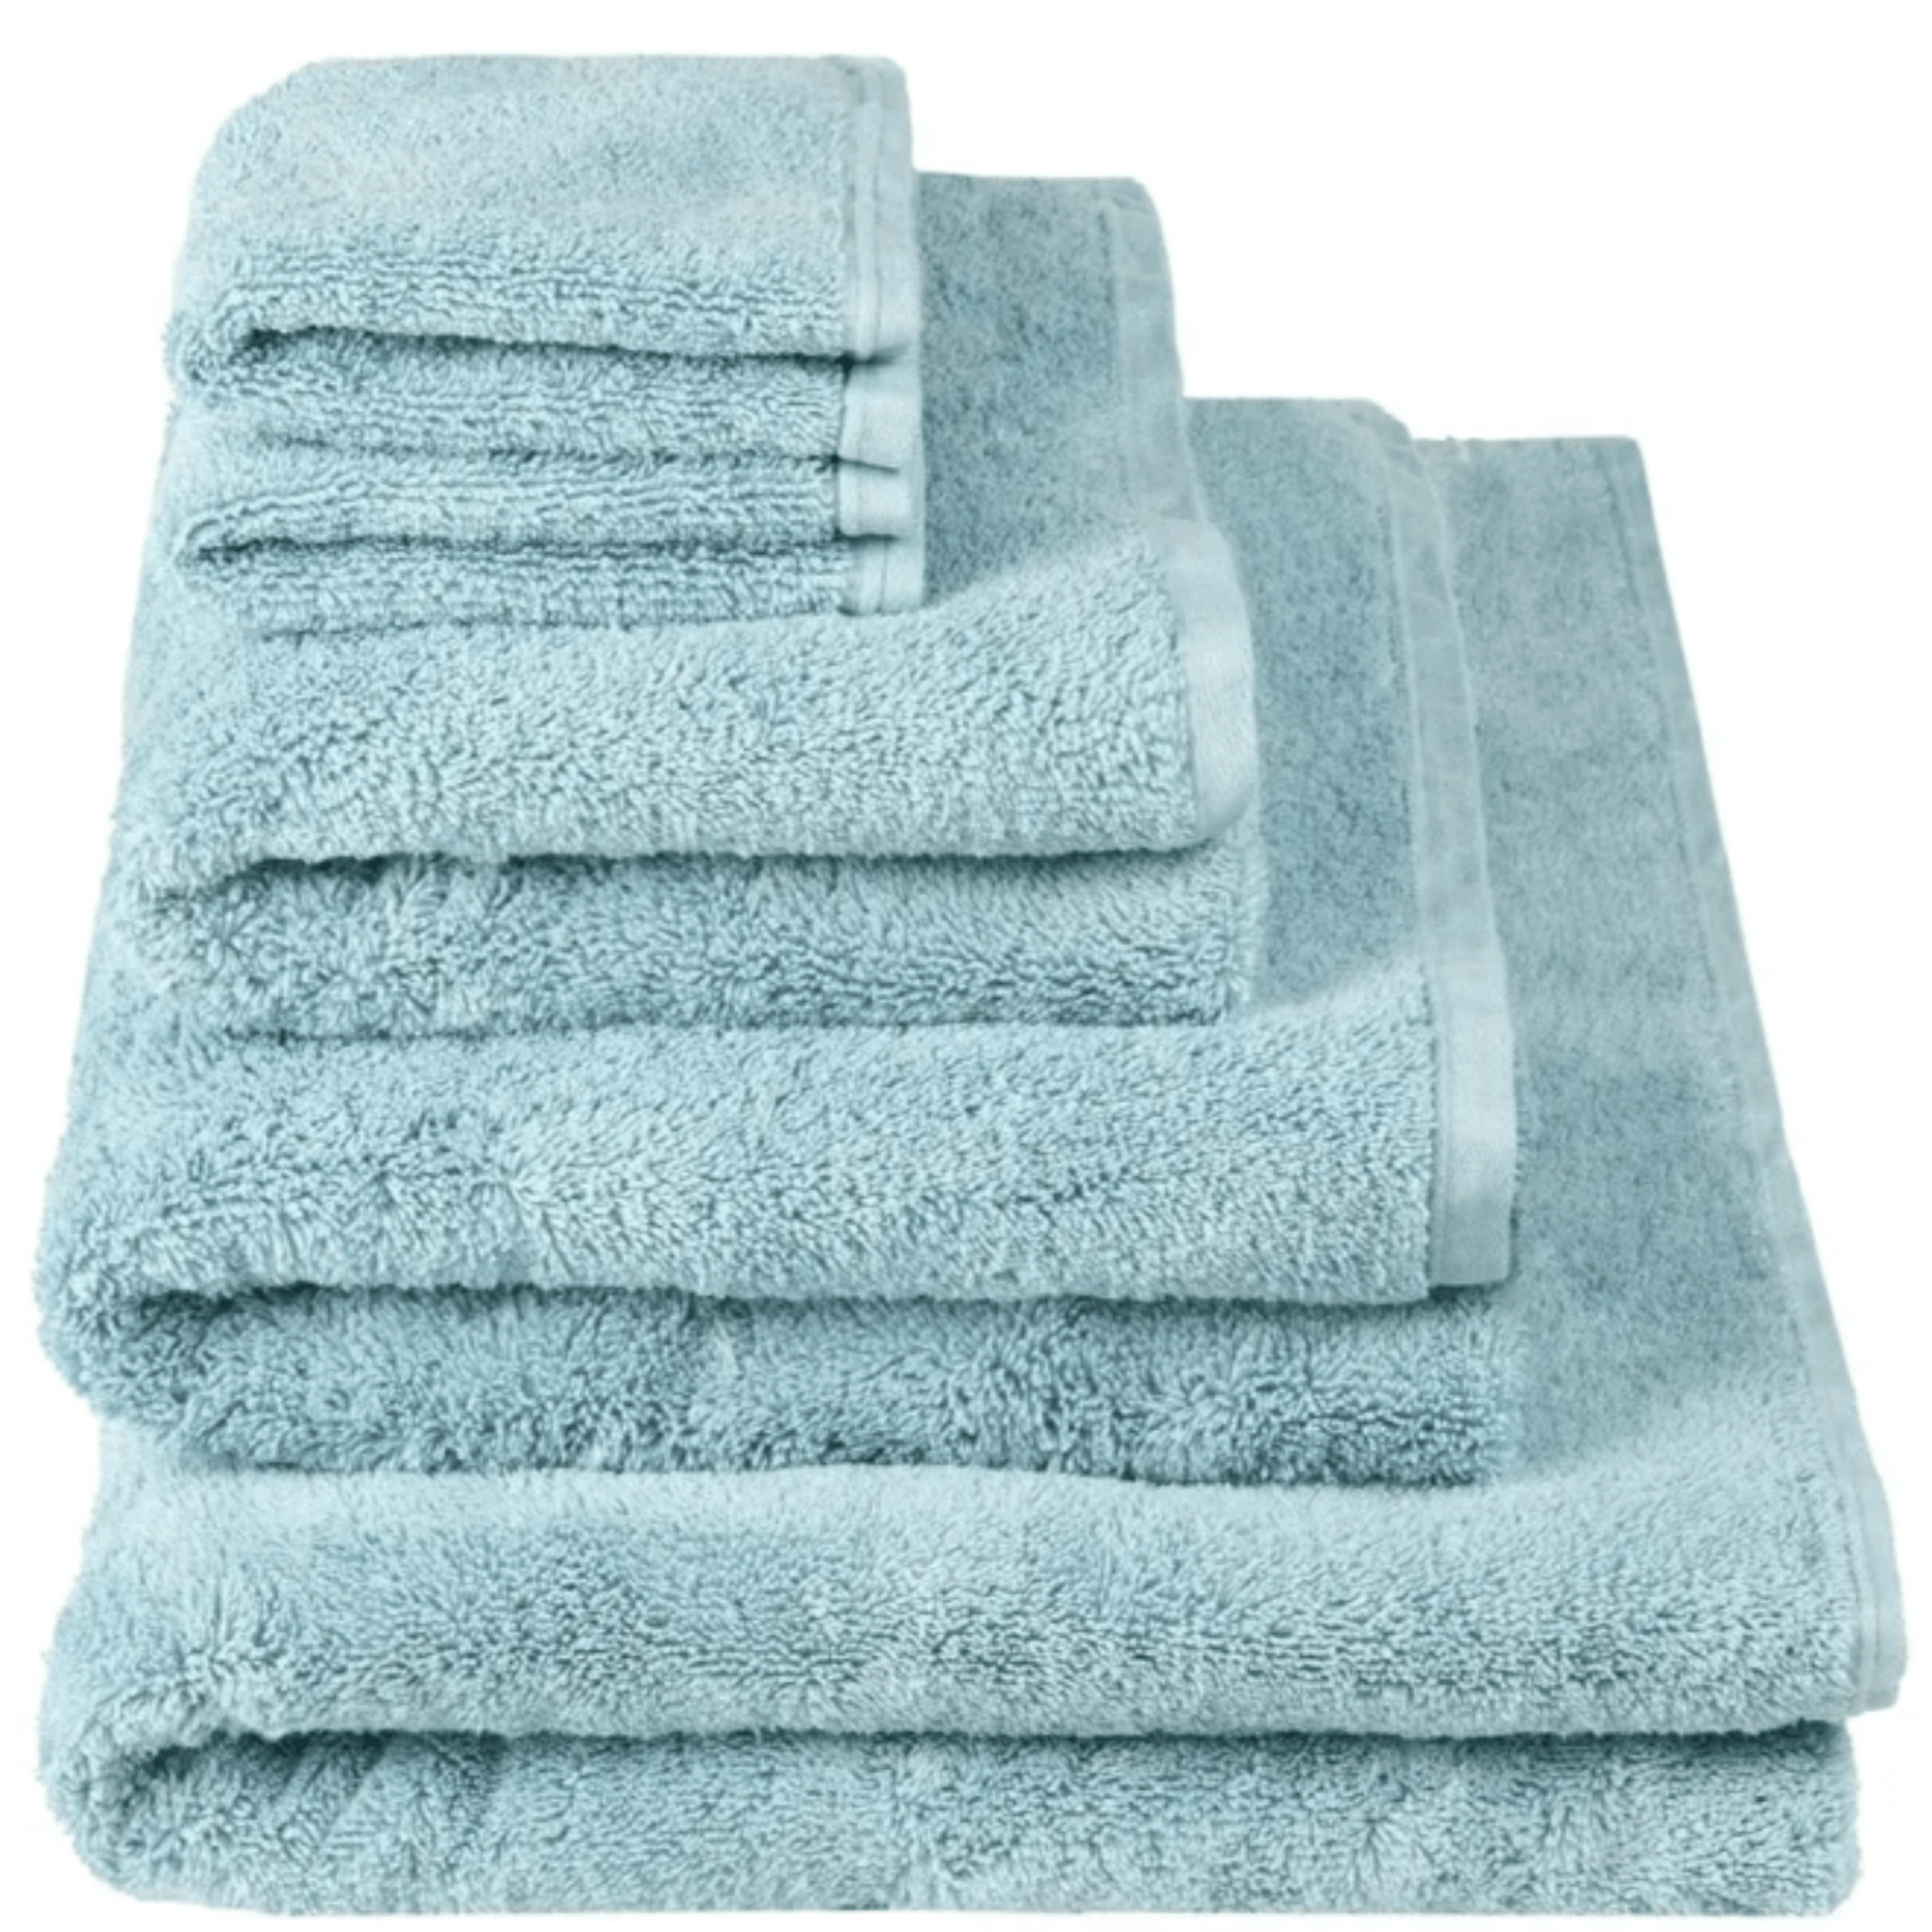 Loweswater Organic Porcelain Towels Bath Towel 28 x 51 in